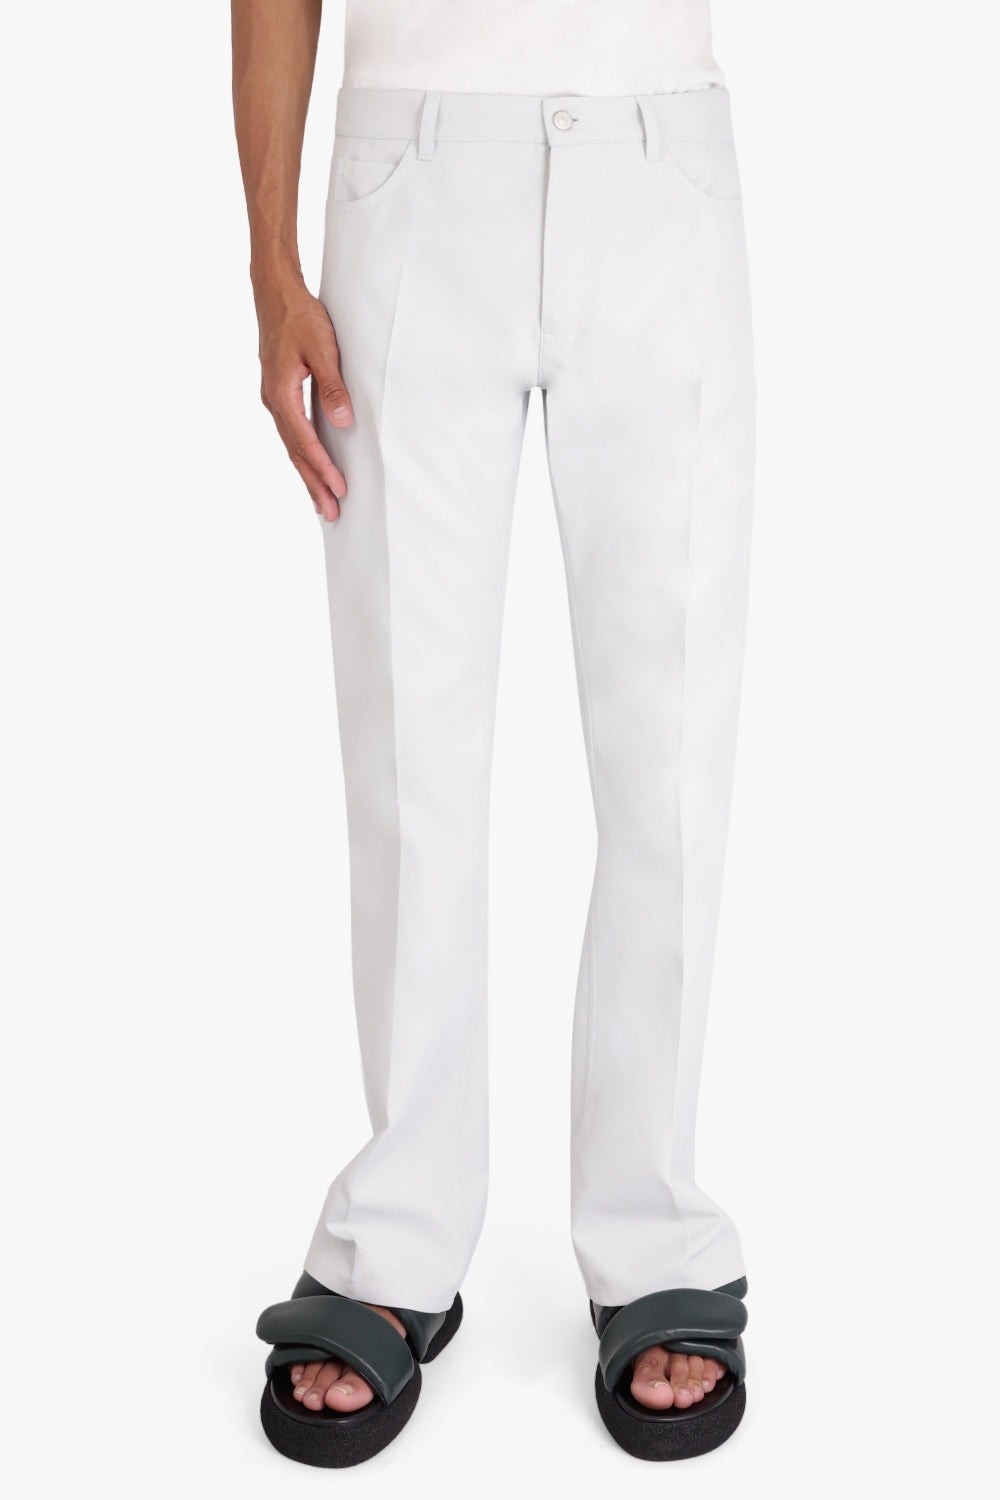 70'S BOOTCUT WORKWEAR PANT | DIRTY WHITE - 3